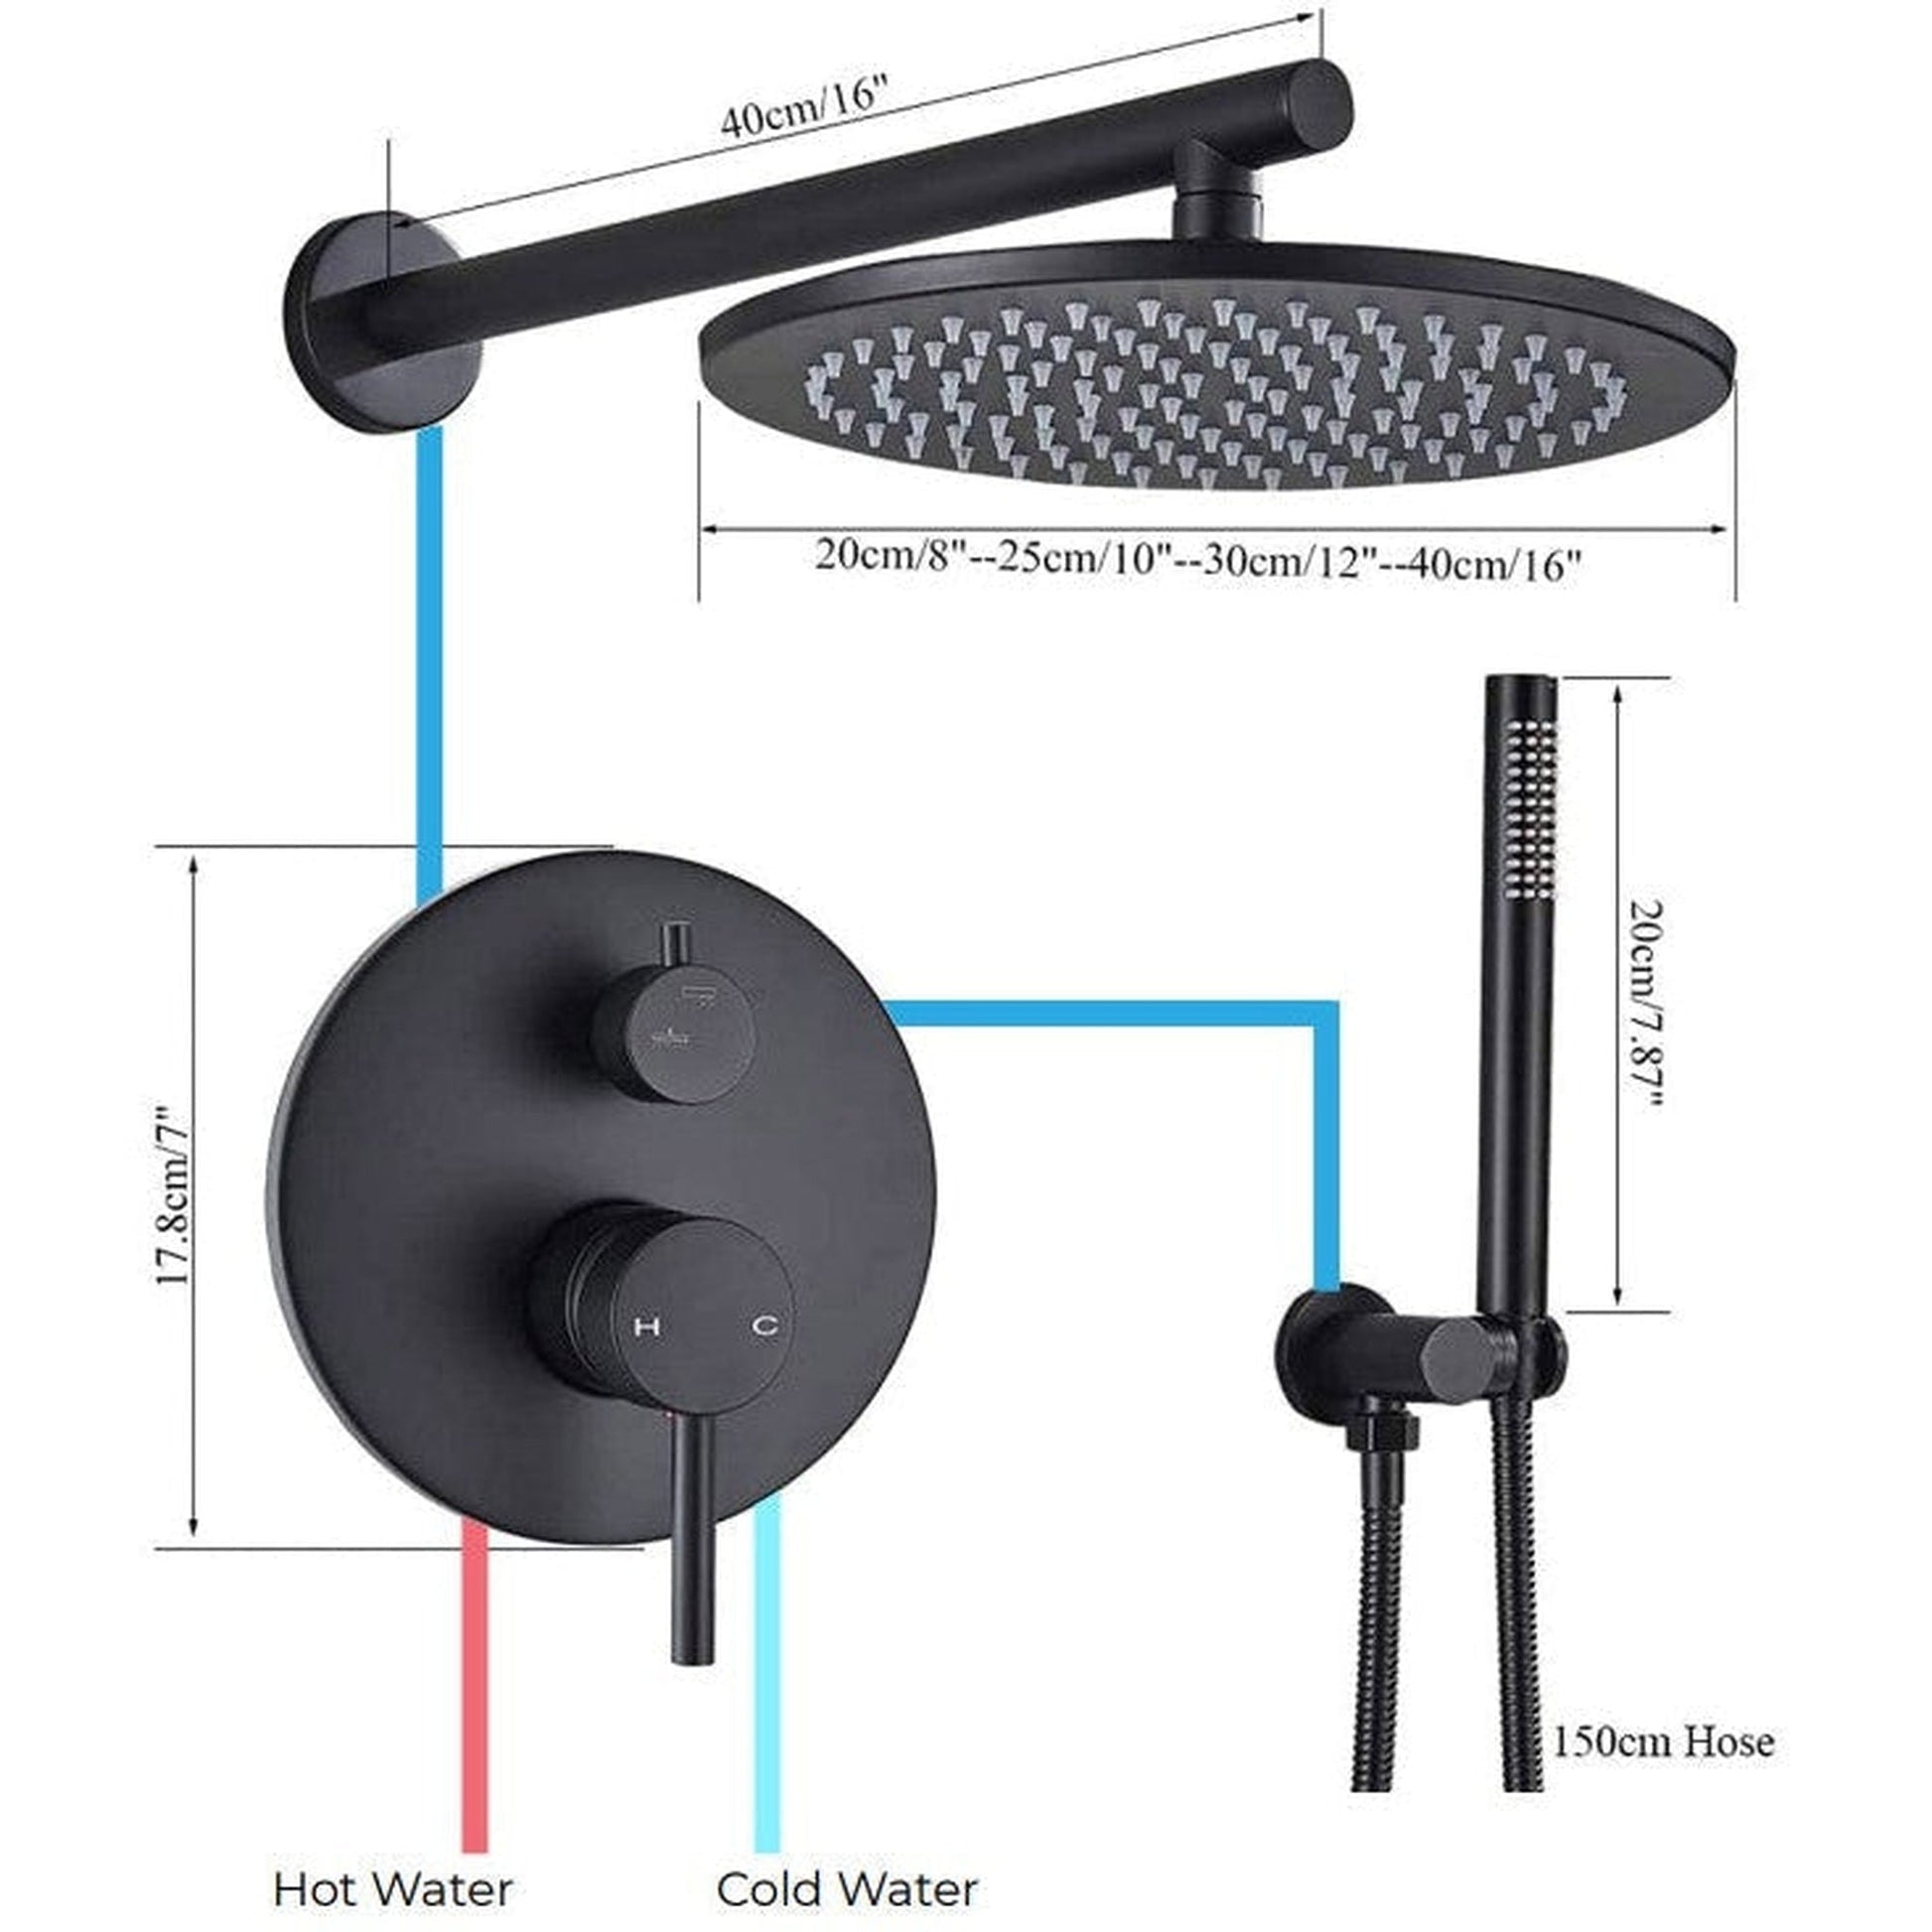 FontanaShowers Verona Creative Luxury 12" Dark Oil Rubbed Bronze Round Wall-Mounted Shower Head Hot and Cold Mixer Rainfall Shower System With Hand Shower